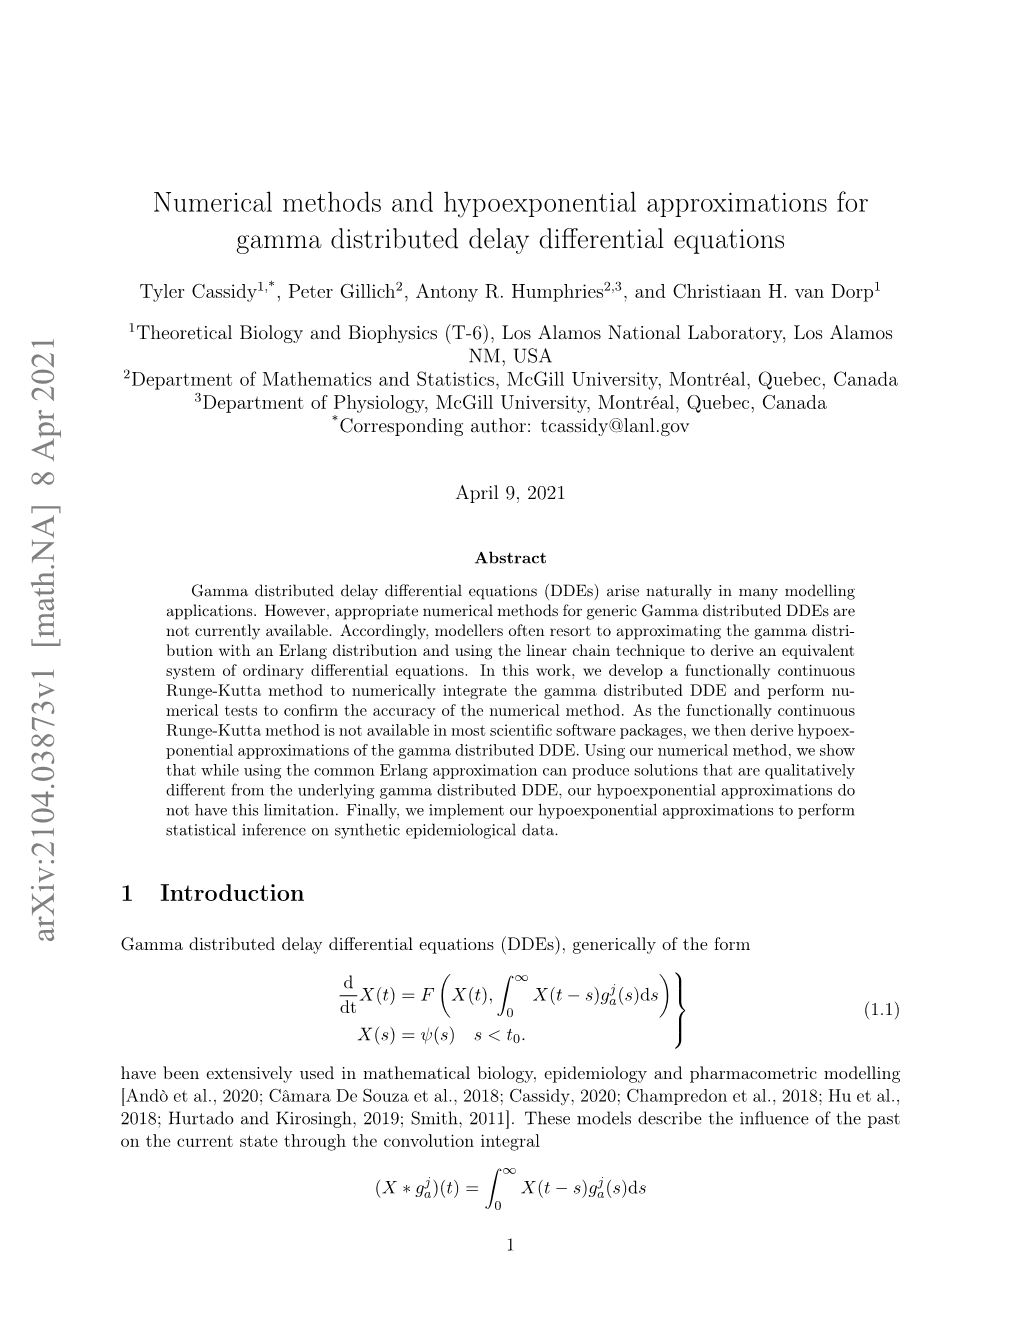 Arxiv:2104.03873V1 [Math.NA] 8 Apr 2021 Gamma Distributed Delay Diﬀerential Equations (Ddes), Generically of the Form